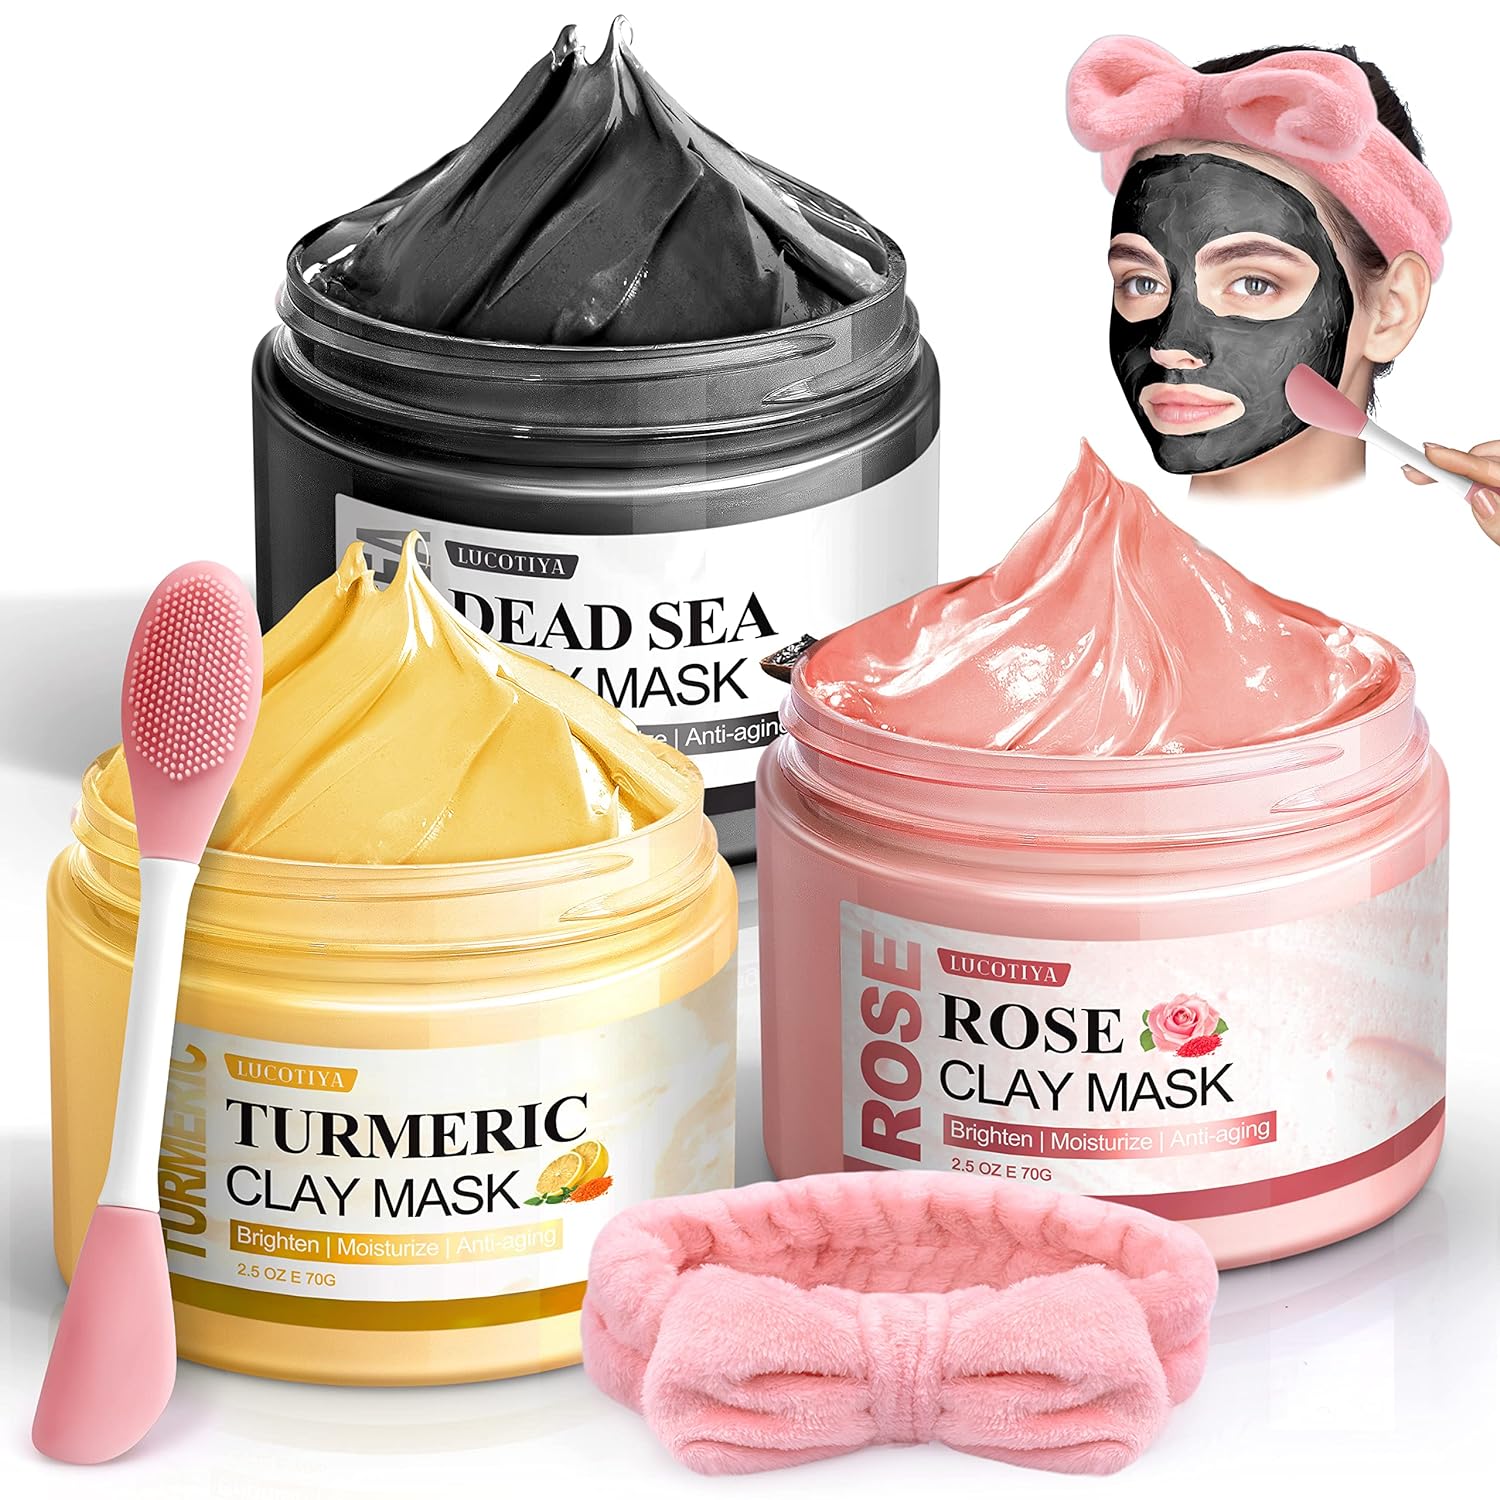 5 Pcs Face Mask Skin Care Set for Deep Pore Cleansing Turmeric Vitamin C Clay Mask, Dead Sea Mud Mask, Rose Clay Mask for Face Masks Skincare Personal Skin Care Products Gifts Headbands for Women